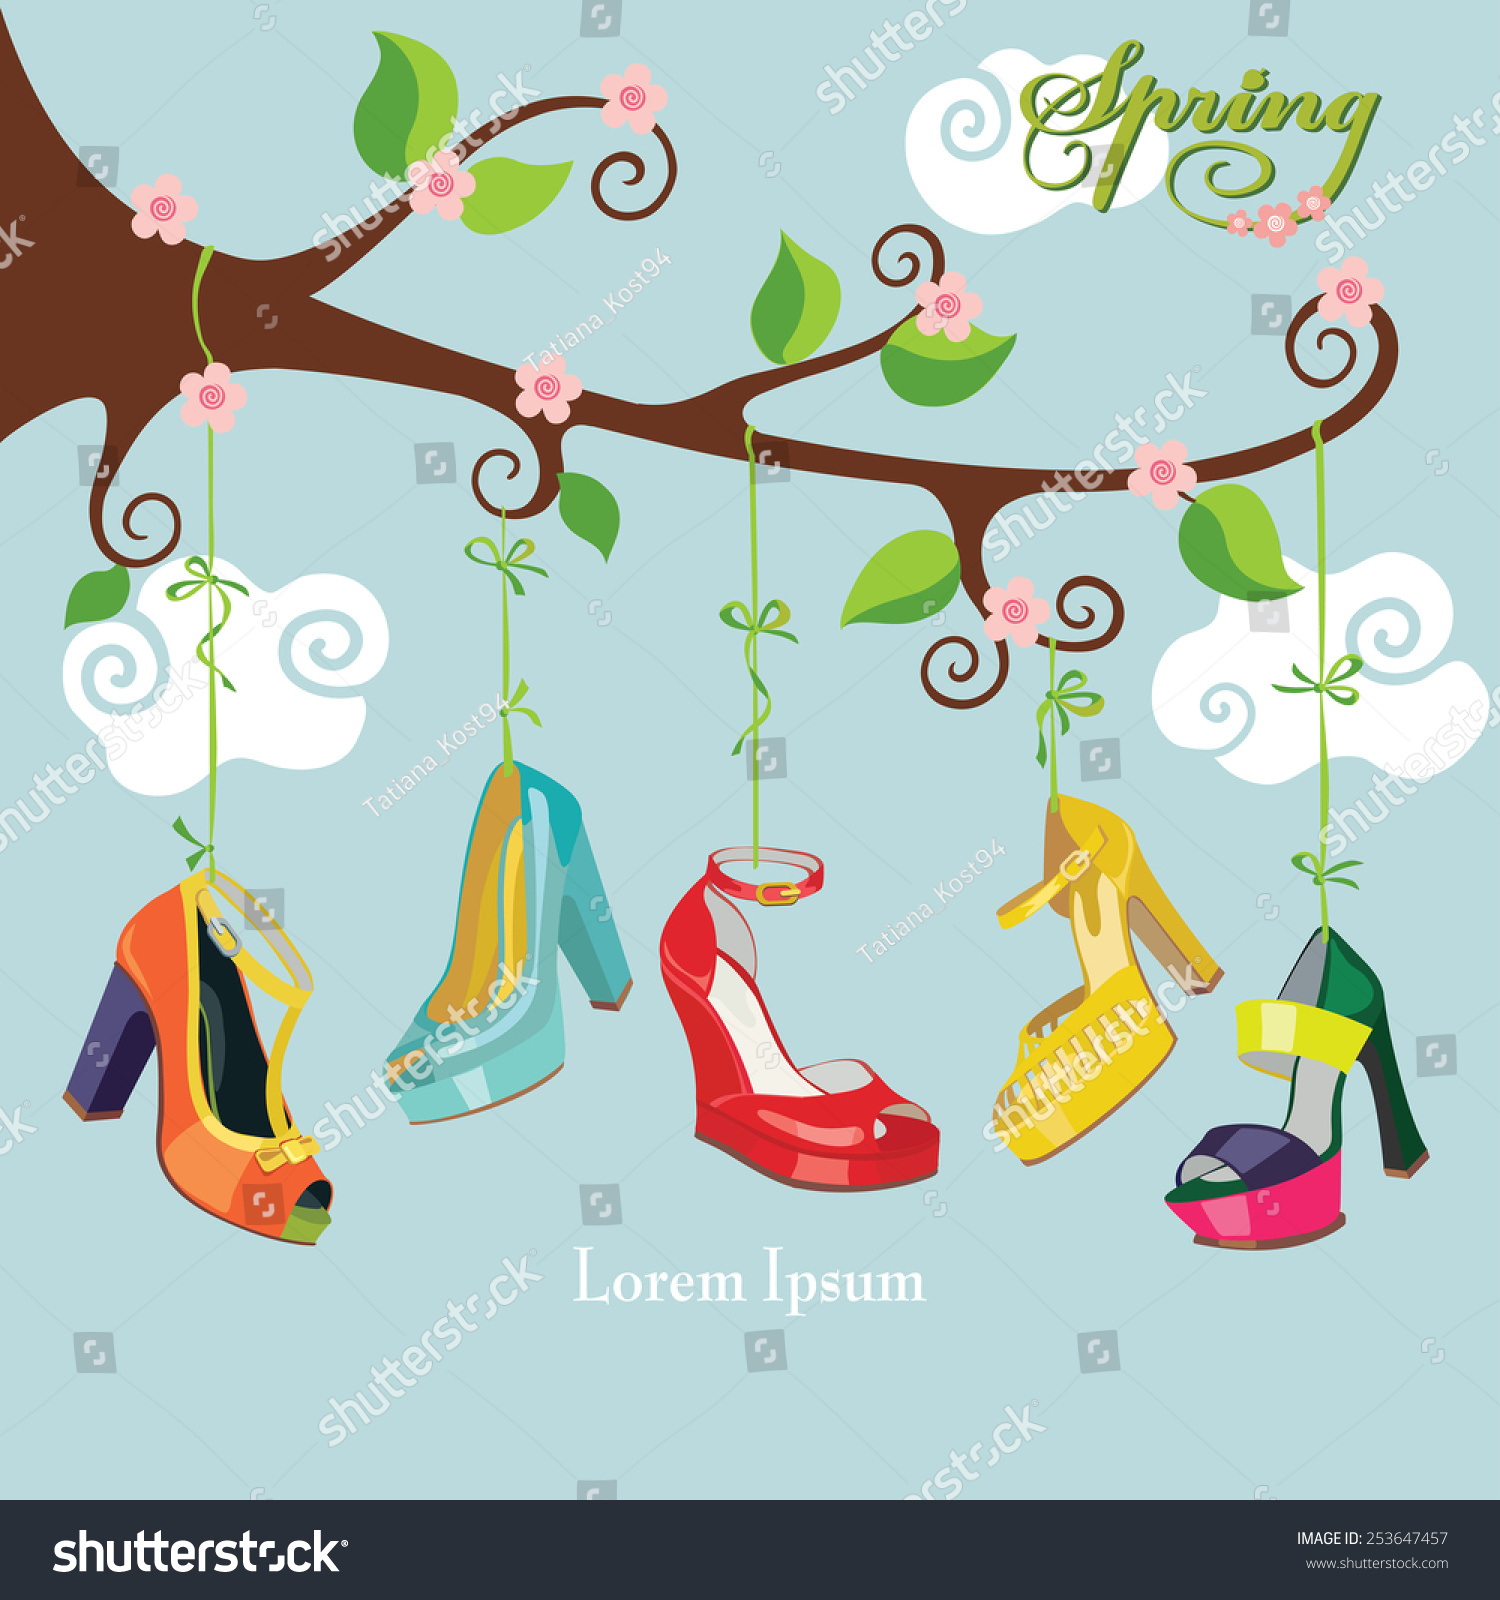 Vector Spring Cardflowering Branch Colored High Stock Vector Pertaining To High Heel Shoe Template For Card